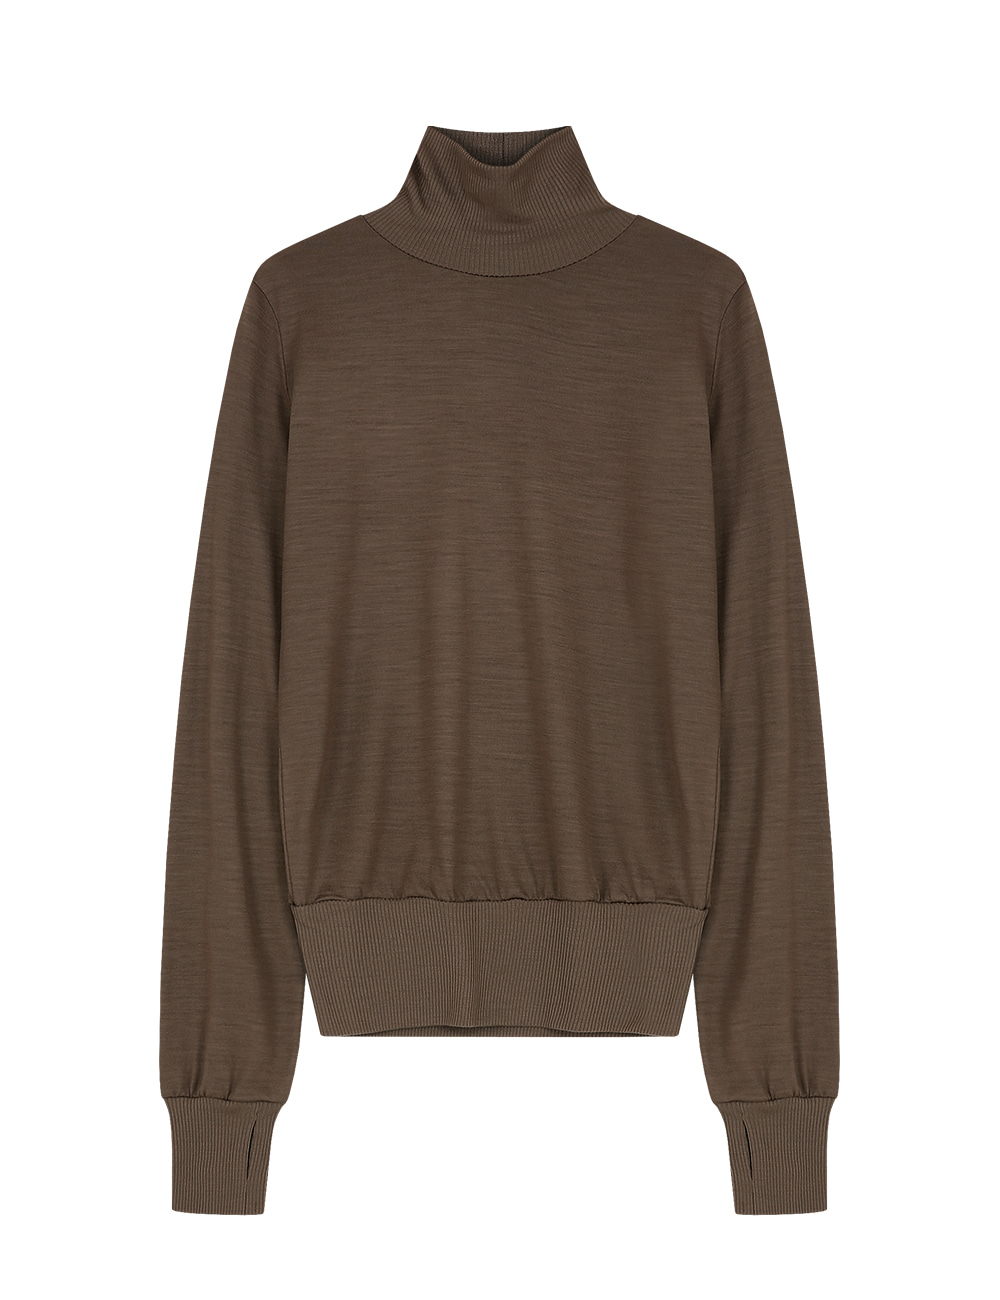 COVER STITCH WOOL JERSEY MOCK NECK TOP (BROWN)